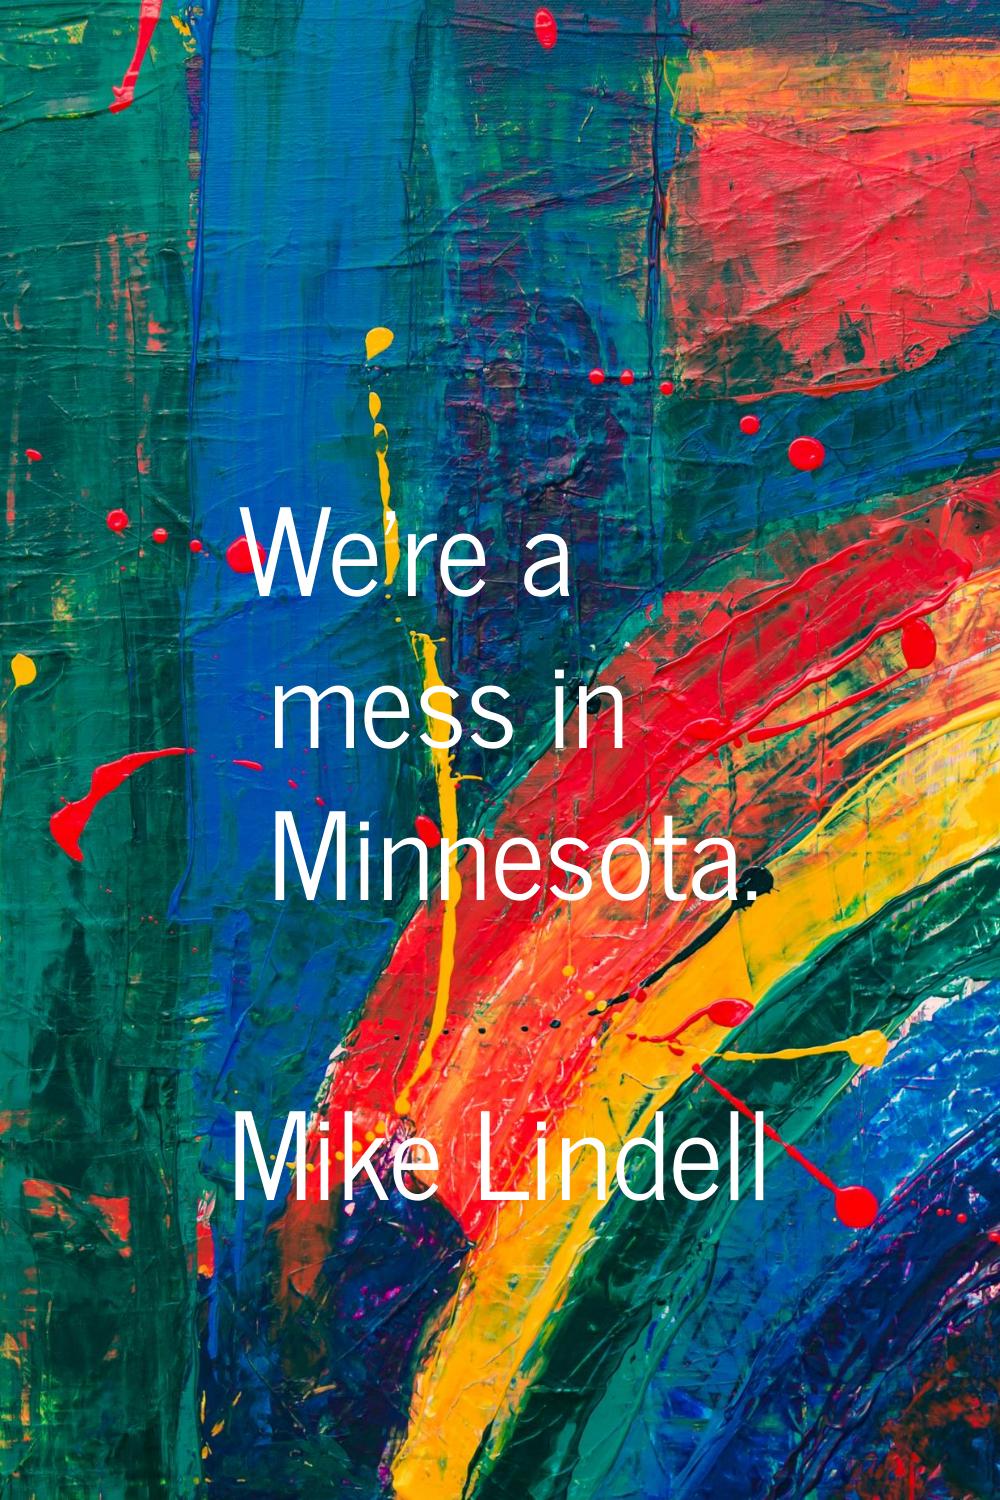 We're a mess in Minnesota.